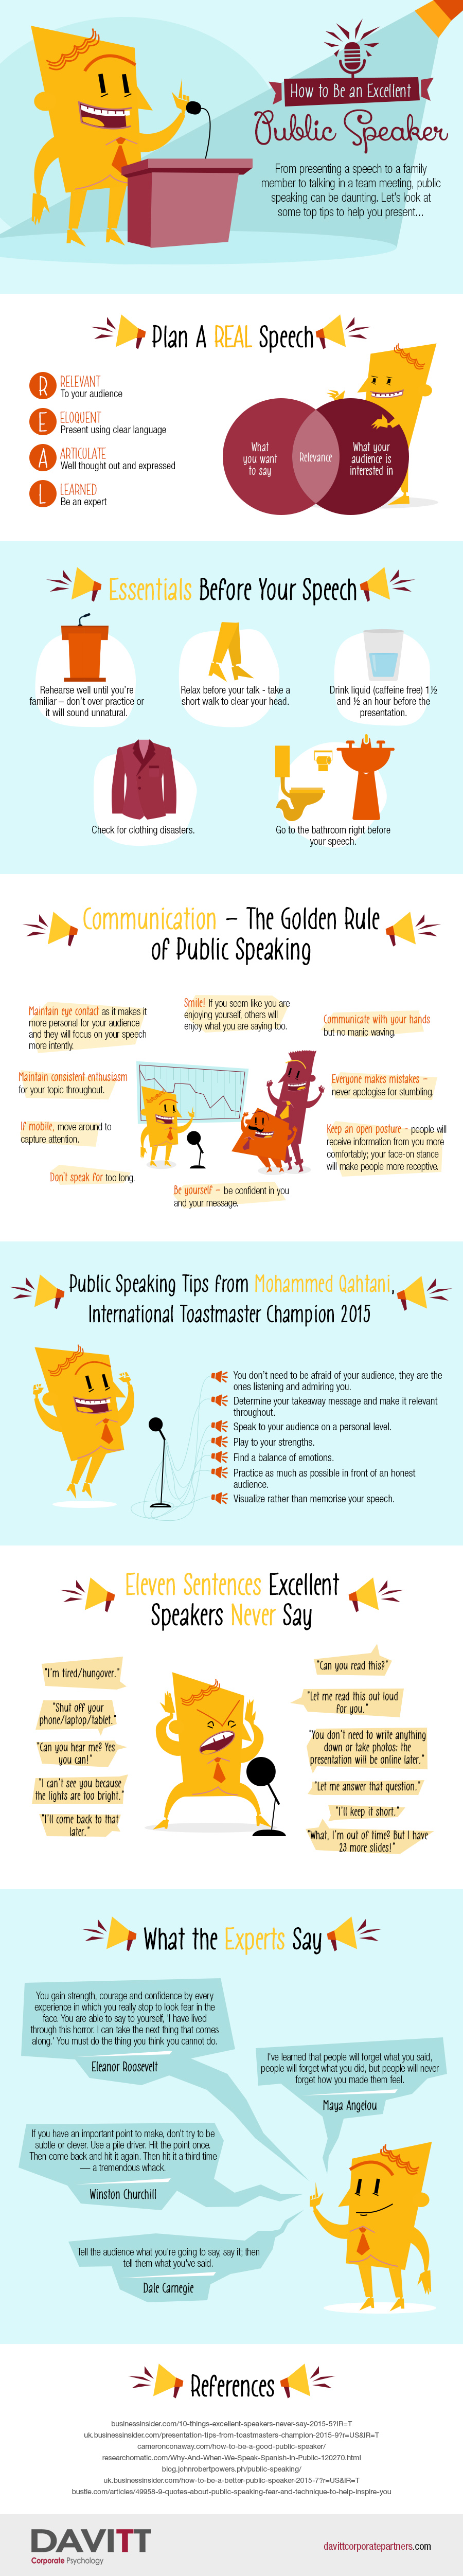 How to Be a Better Public Speaker Infographic